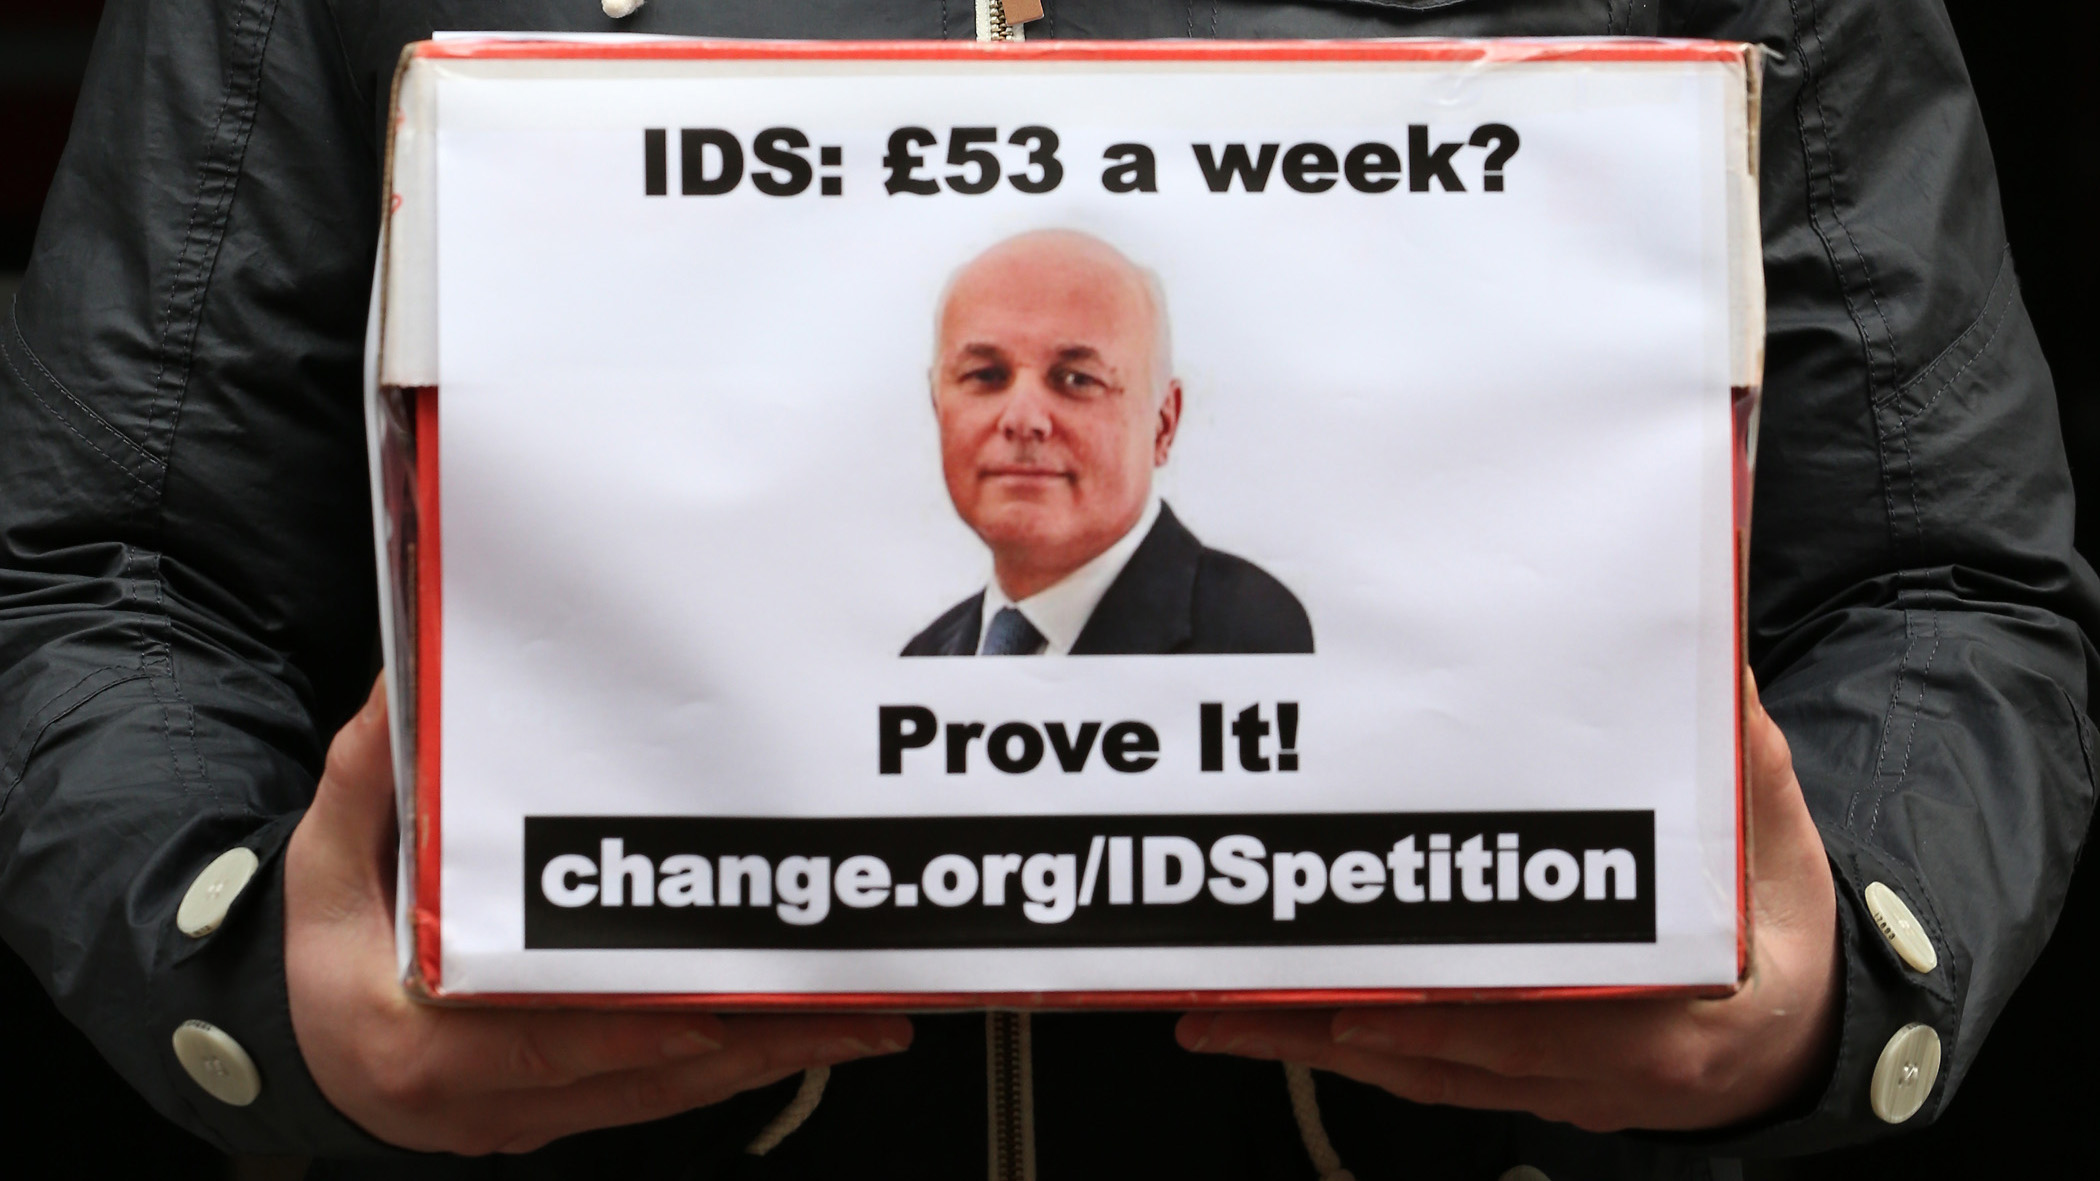 Petition delivered to Iain Duncan Smith